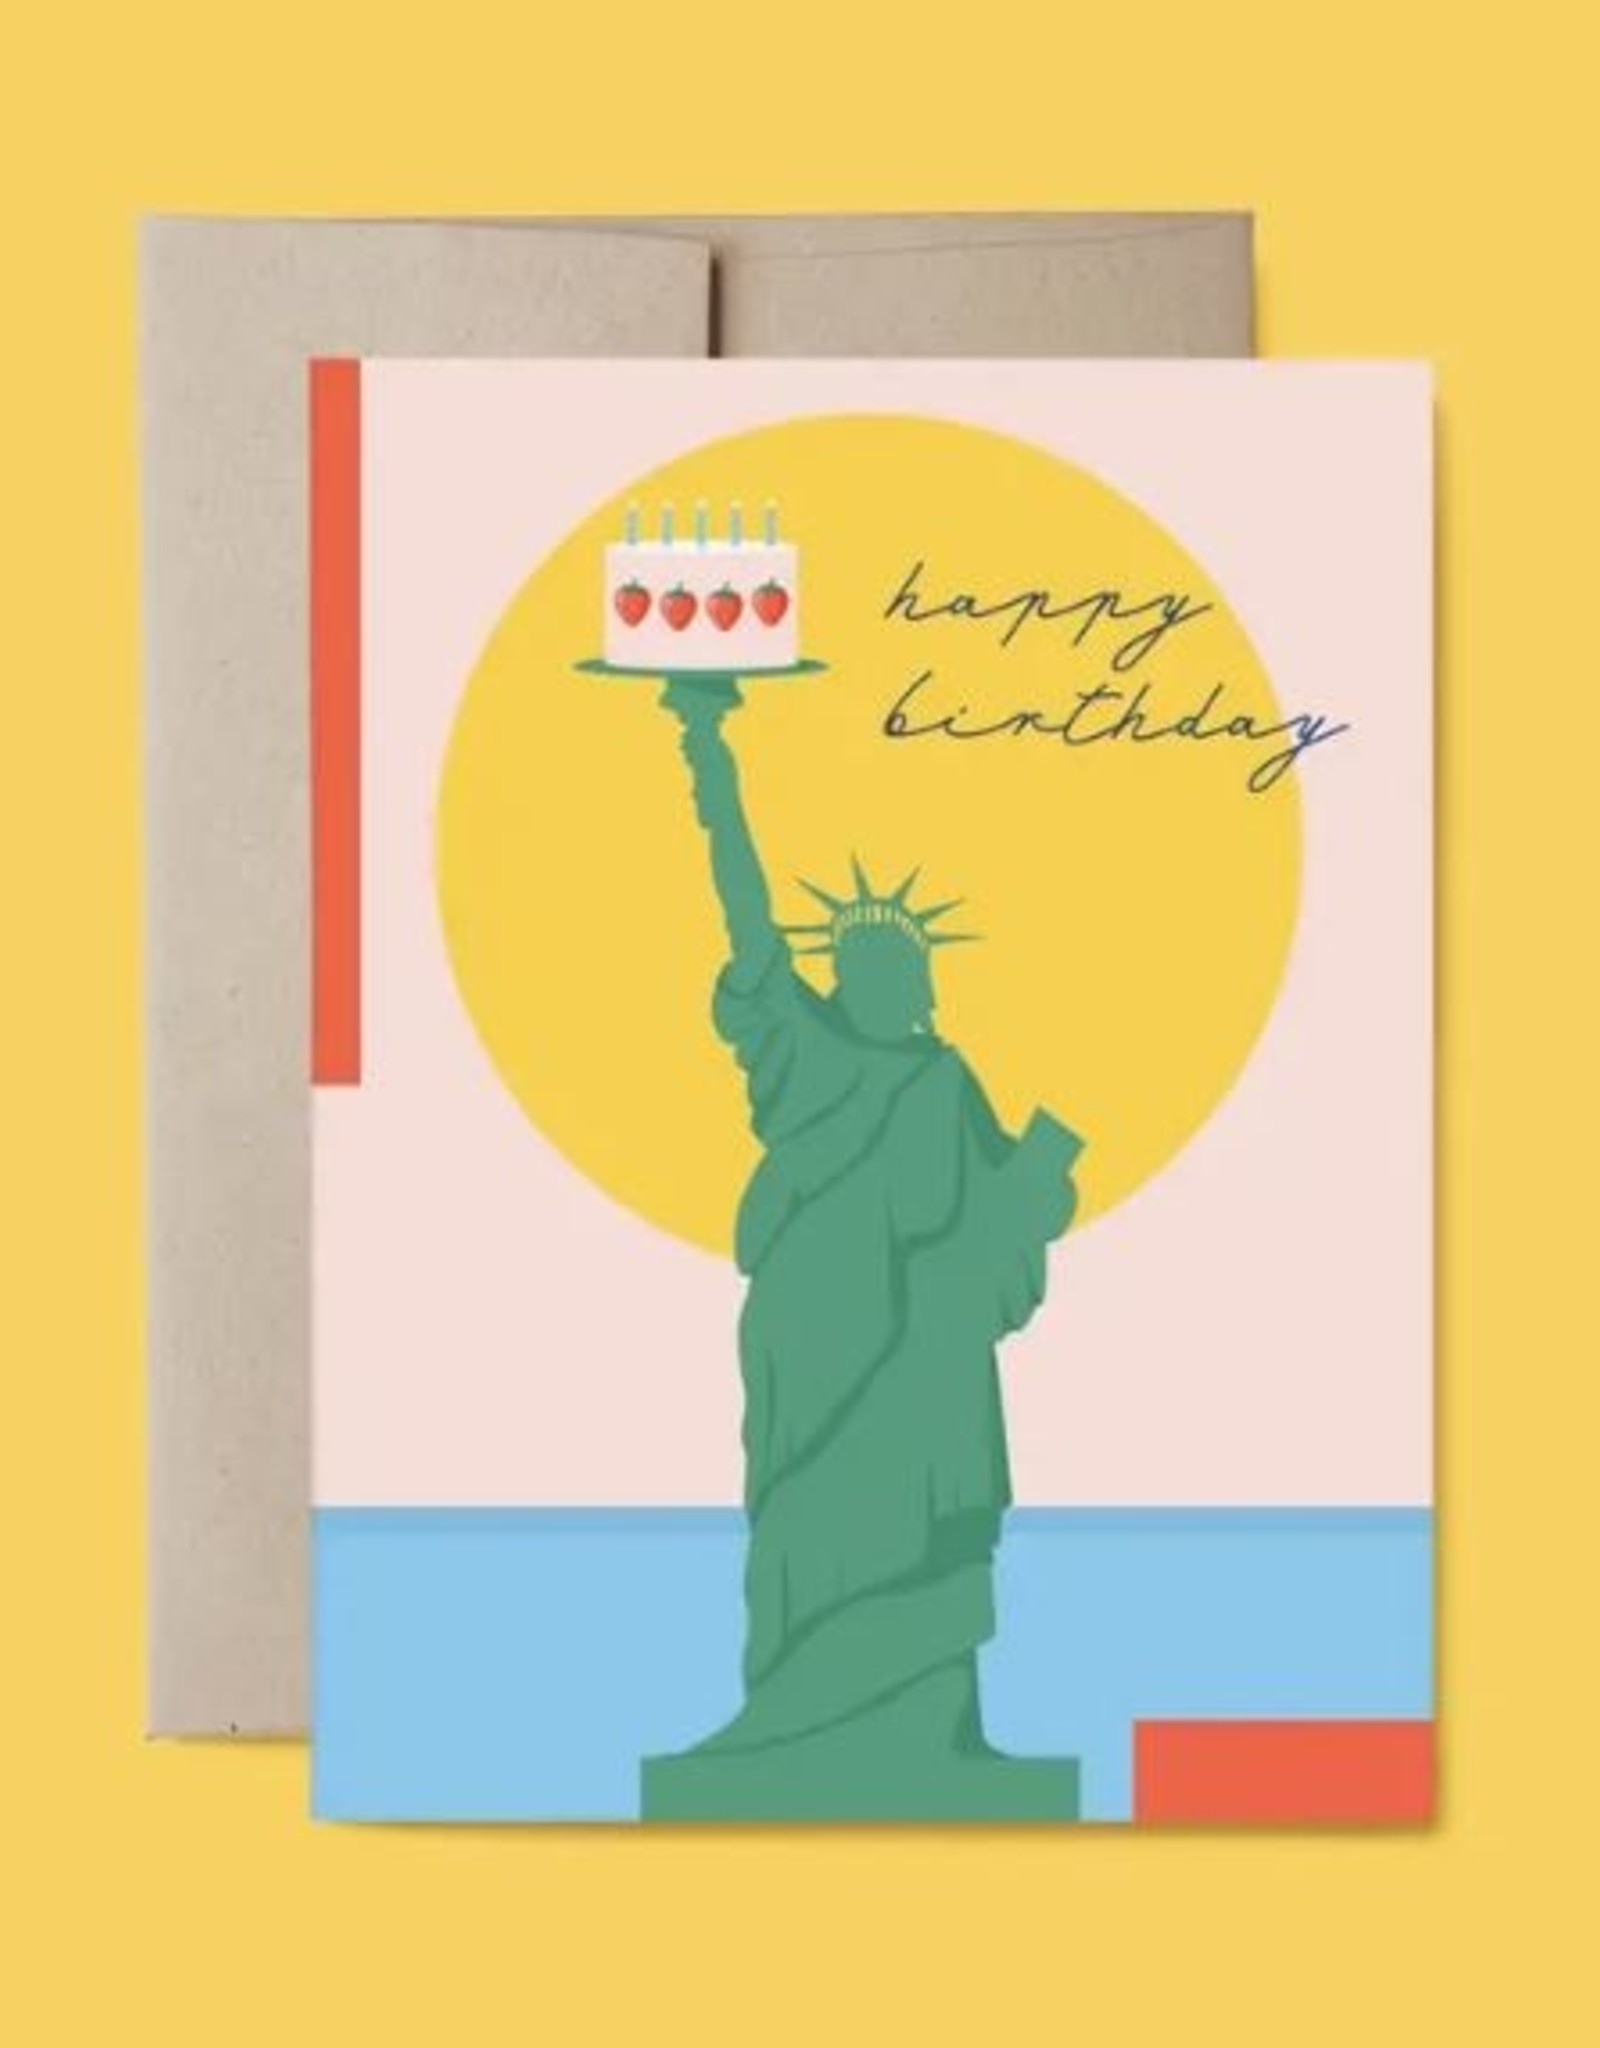 Belle Belette Card - Birthday: NYC Statue of Liberty Cake